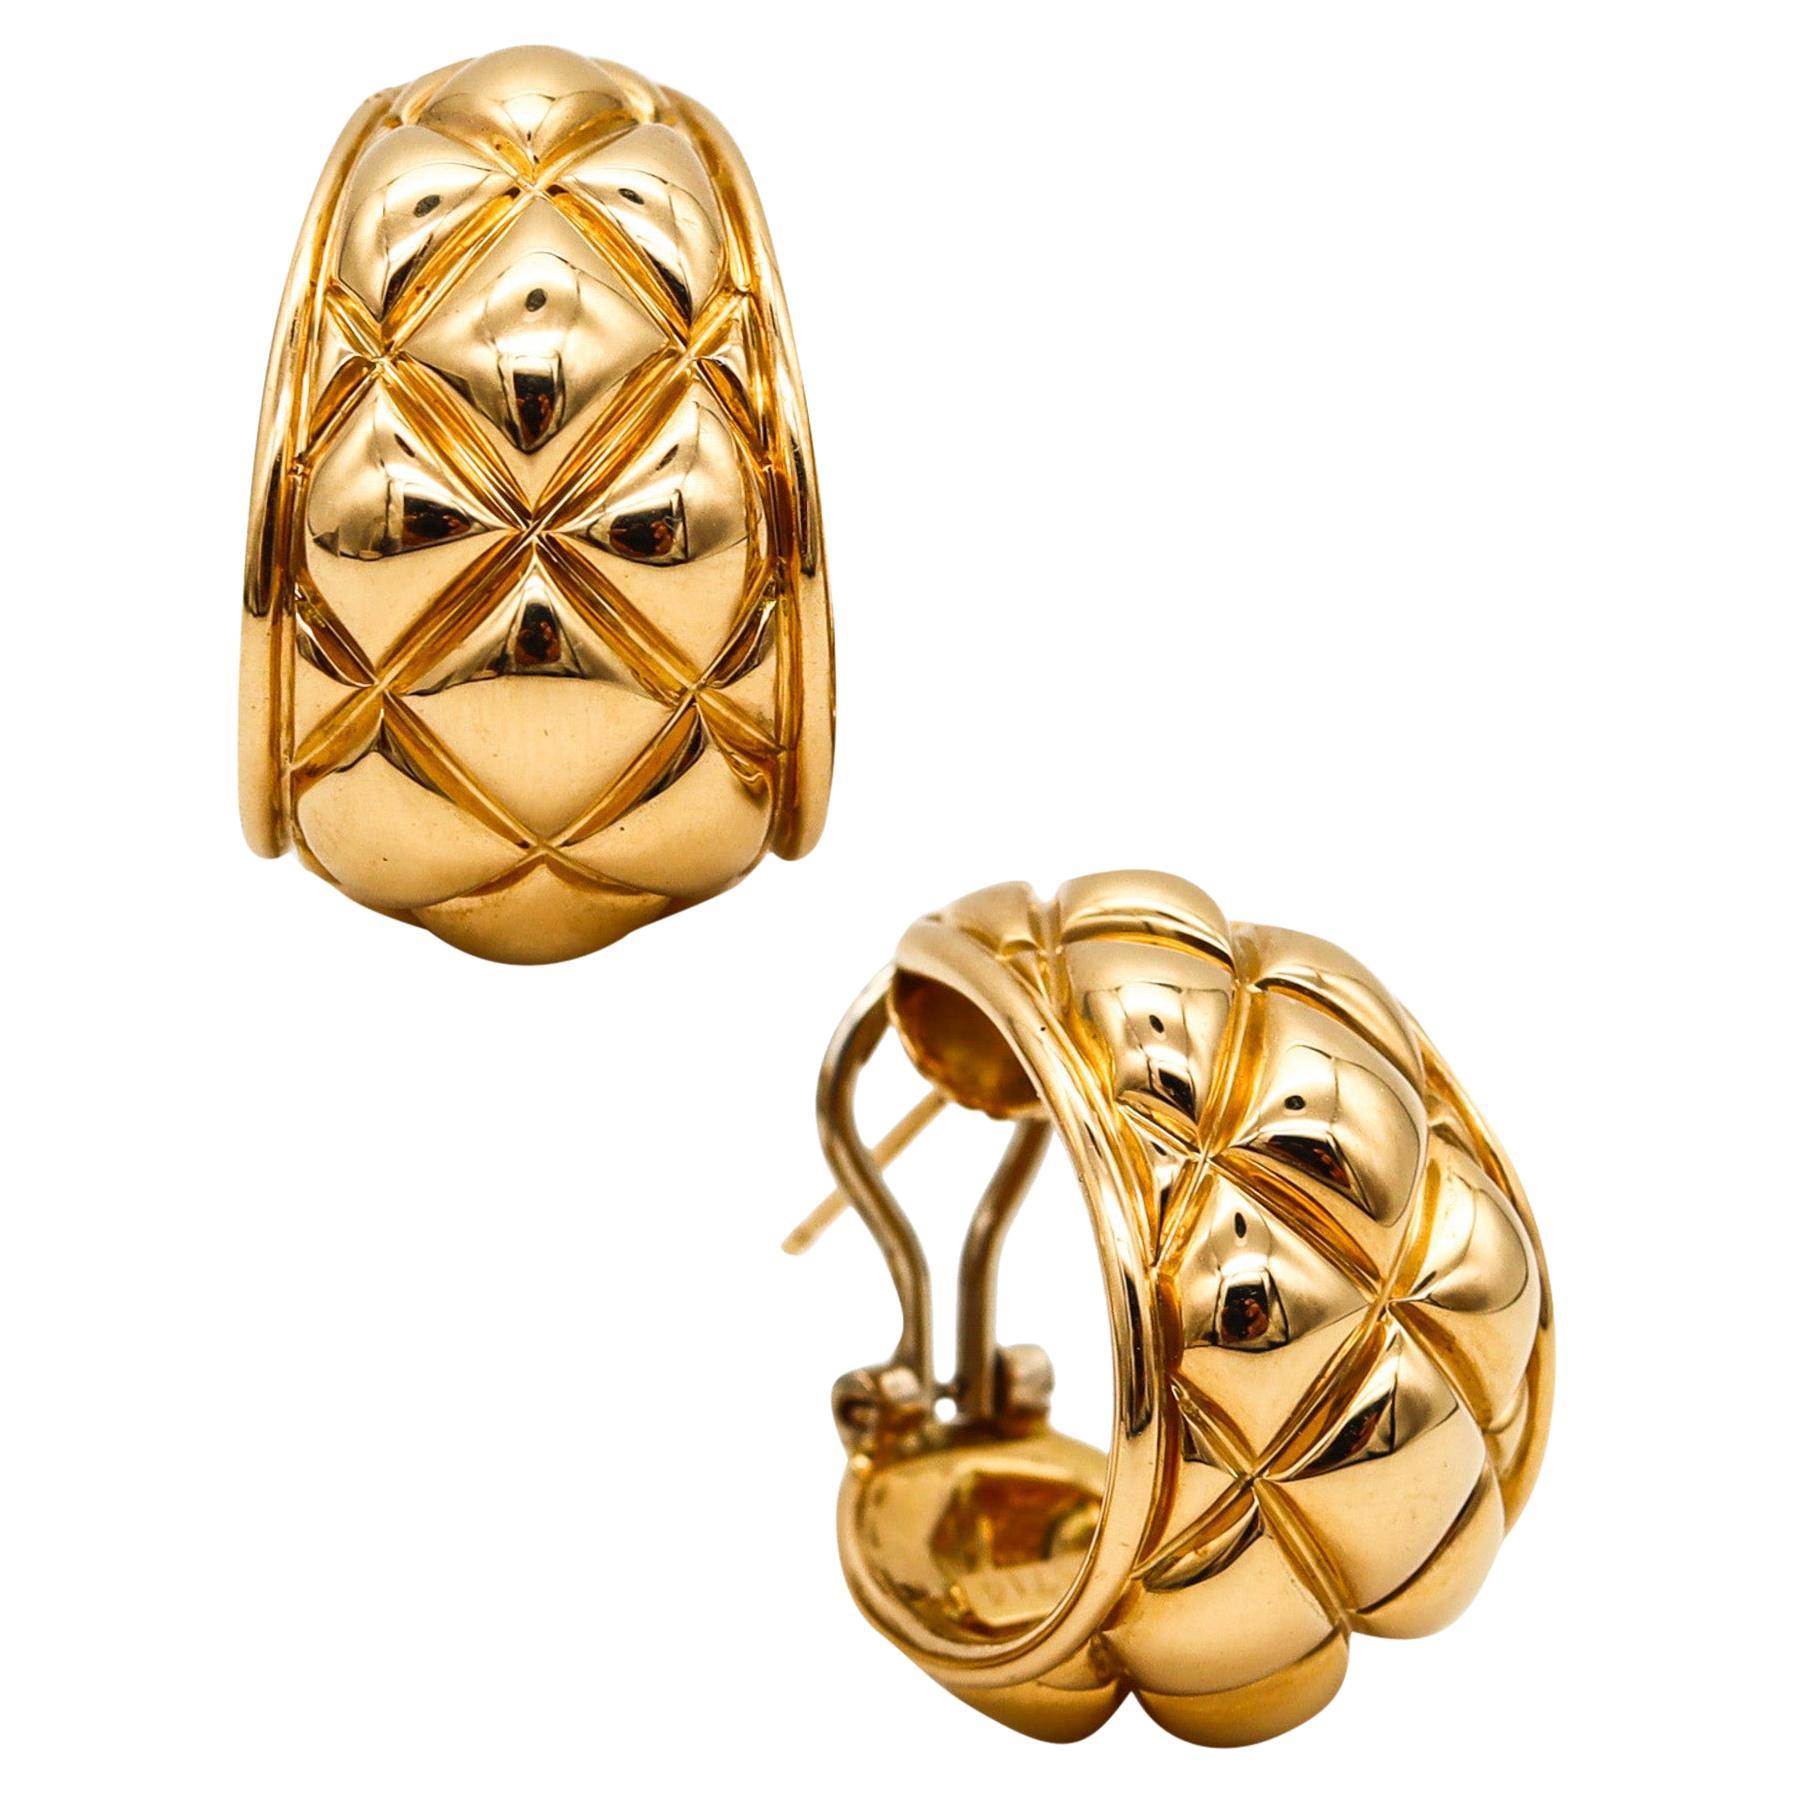 Chaumet Paris 1970 Quilted Modernist Hoops Earrings in Solid 18kt Yellow Gold For Sale